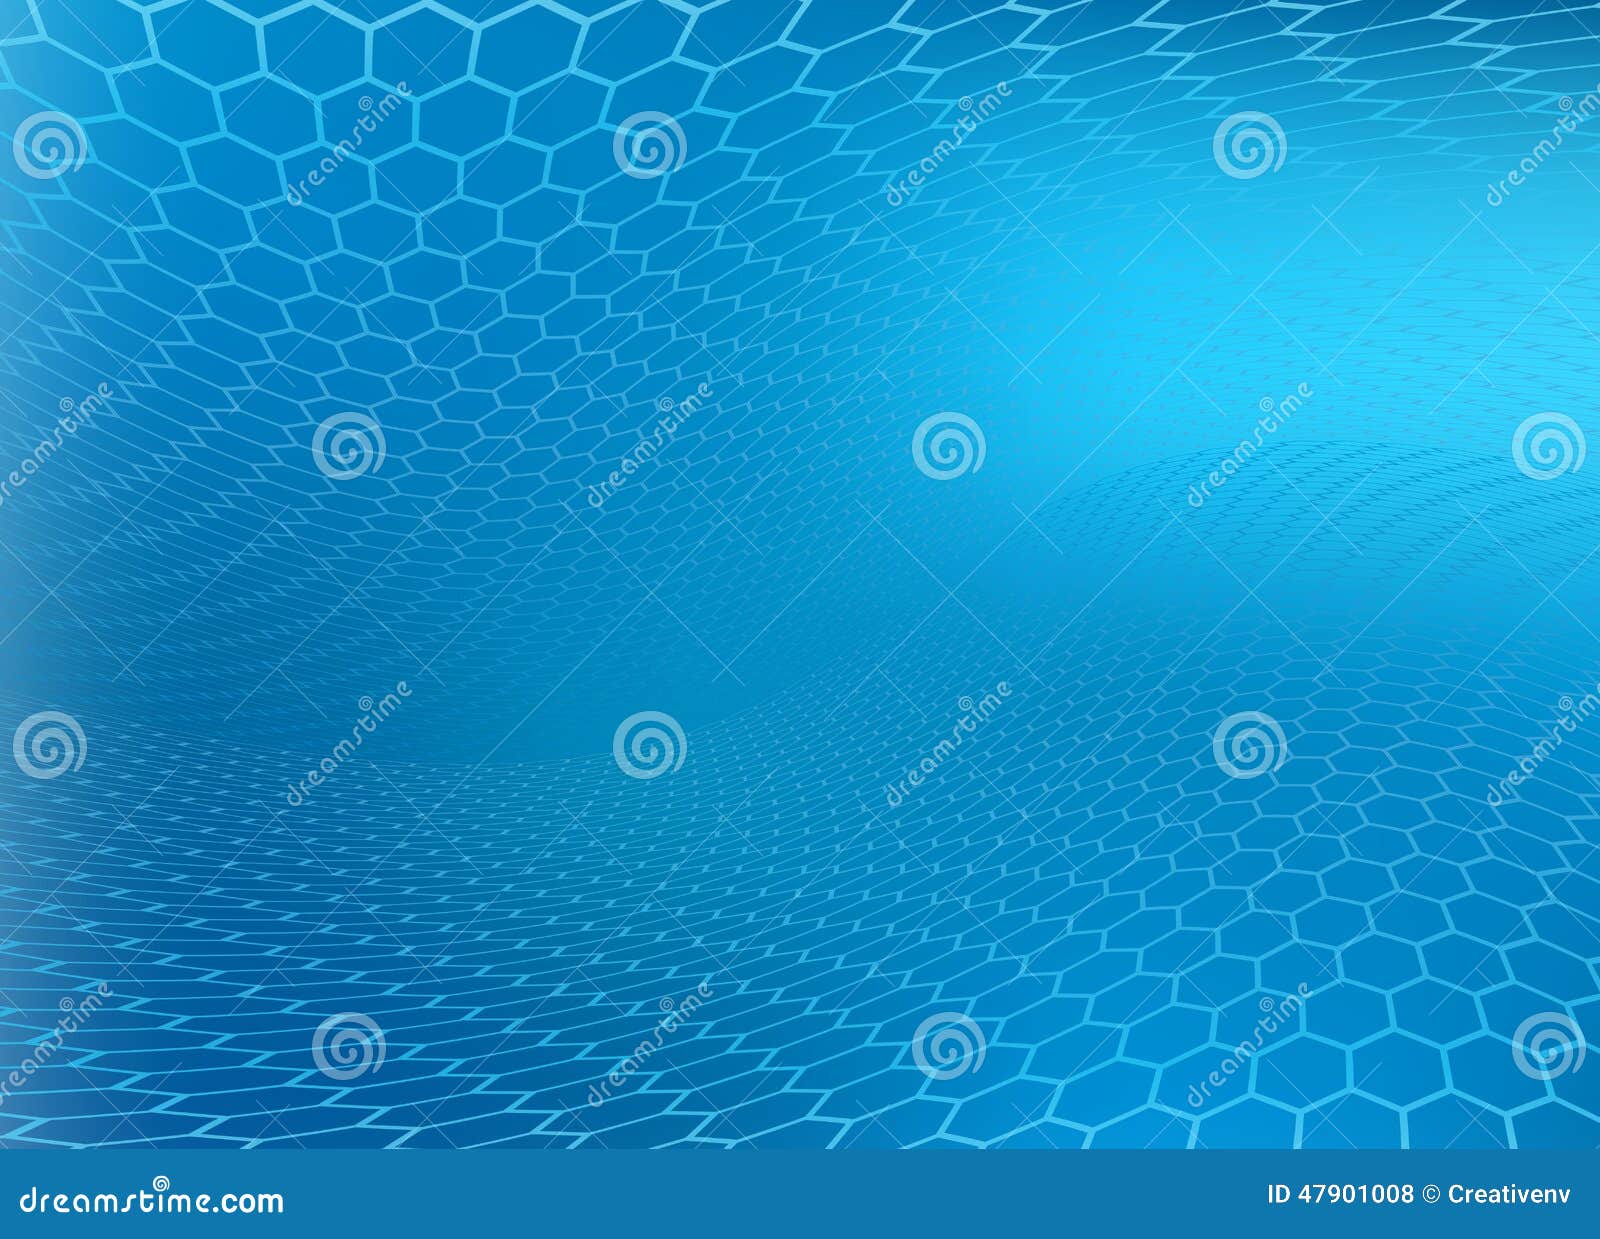 abstract modern medical blue background